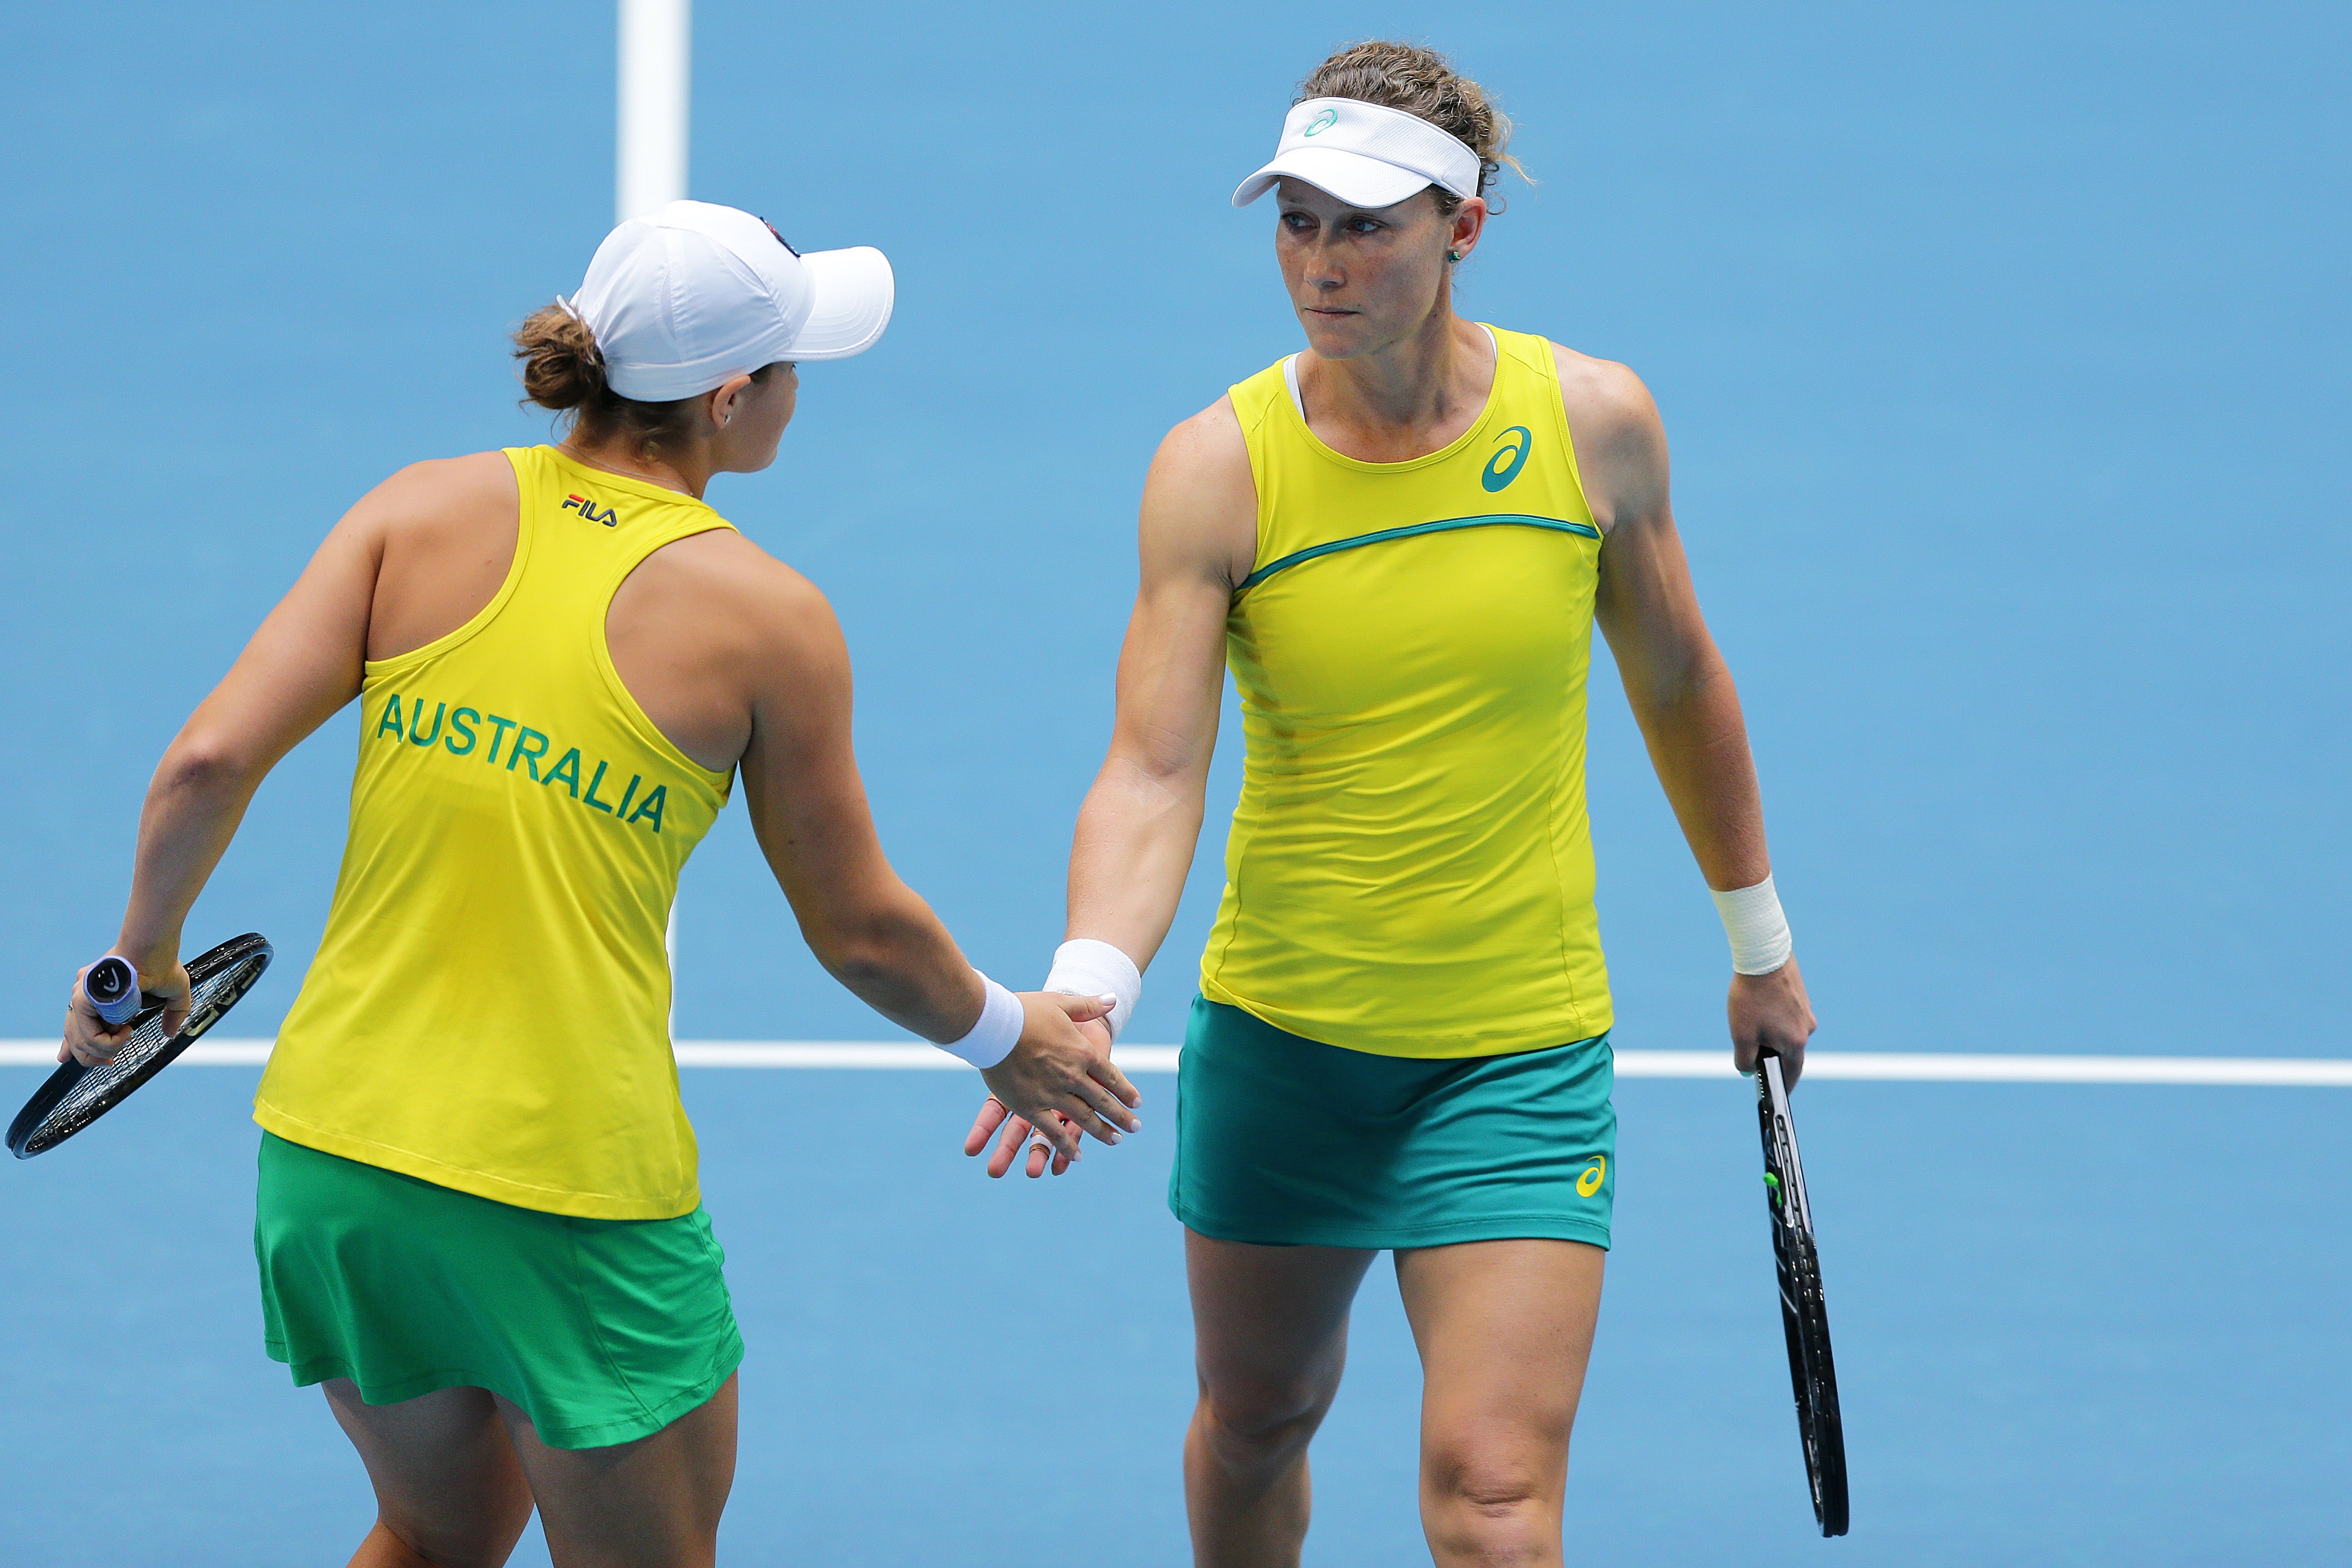 Australia will replace Russia at the finals of the tournament formerly known as the Fed Cup